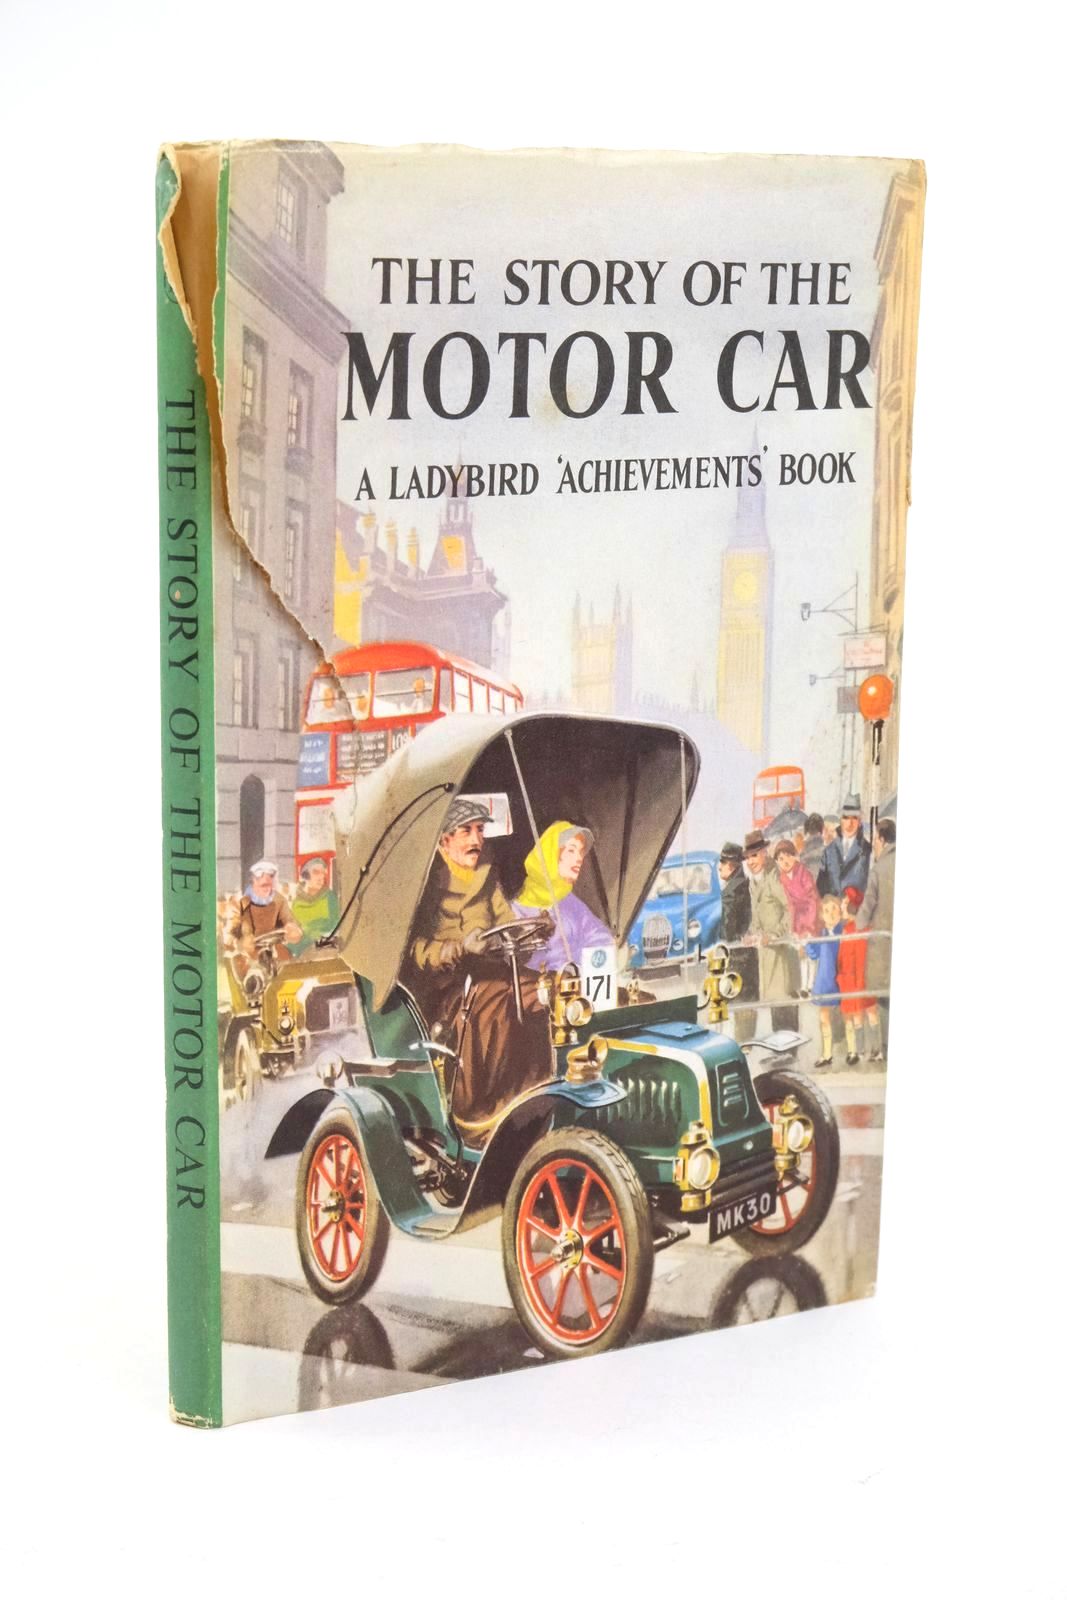 Photo of THE STORY OF THE MOTOR CAR written by Carey, David illustrated by Ayton, Robert published by Wills &amp; Hepworth Ltd. (STOCK CODE: 1322136)  for sale by Stella & Rose's Books